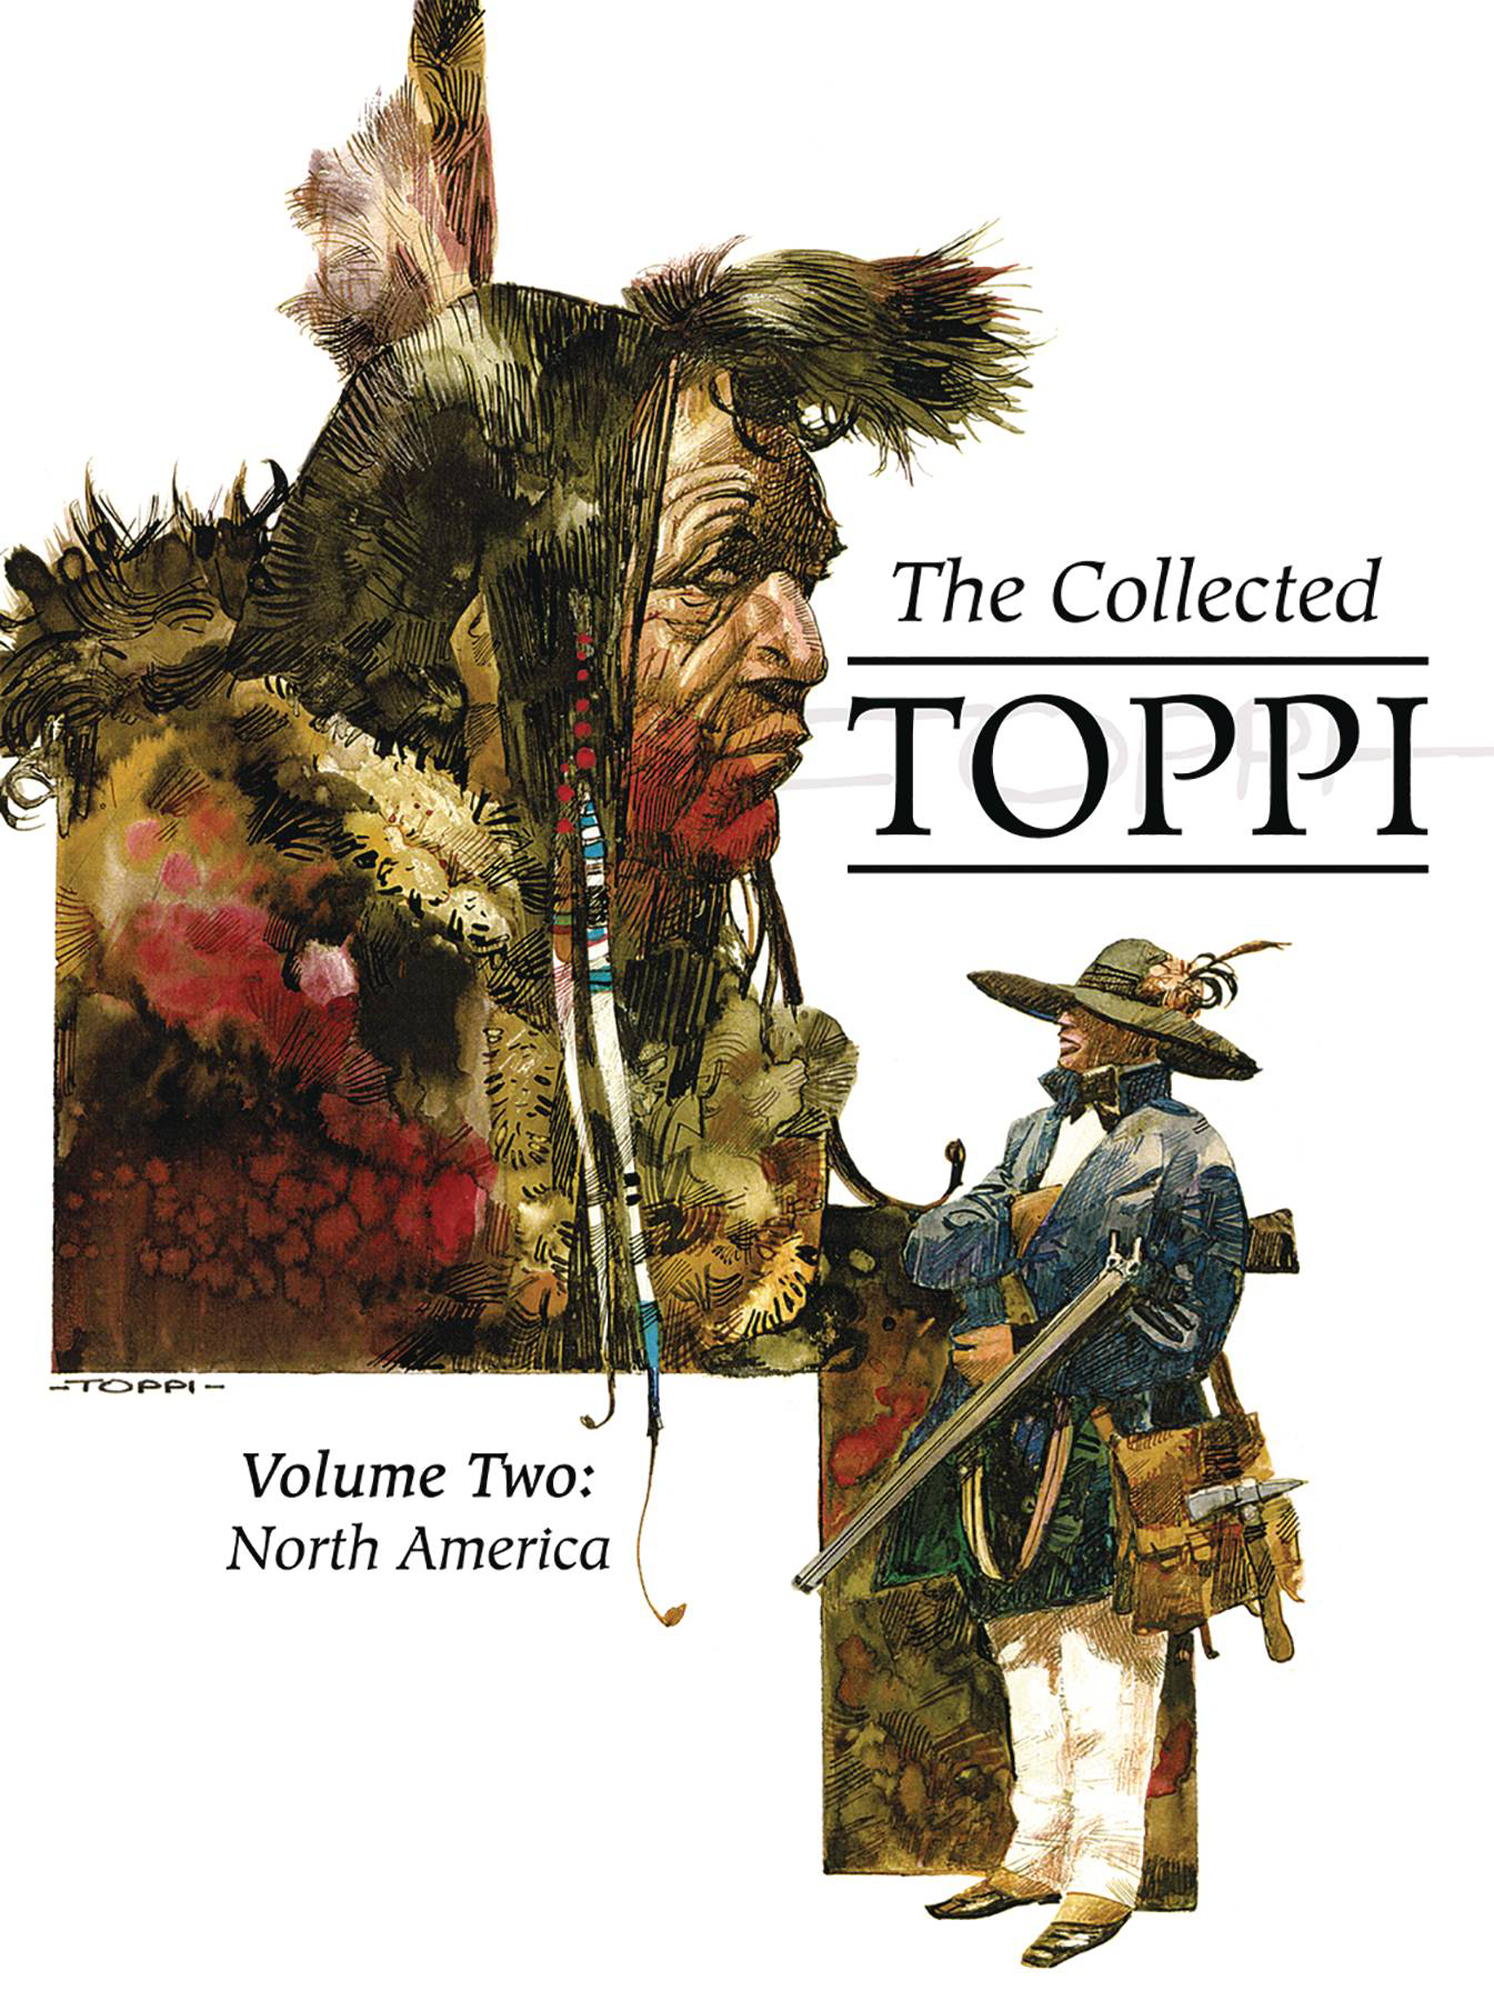 Collected Toppi Hardcover Graphic Novel Volume 2 Enchanted World